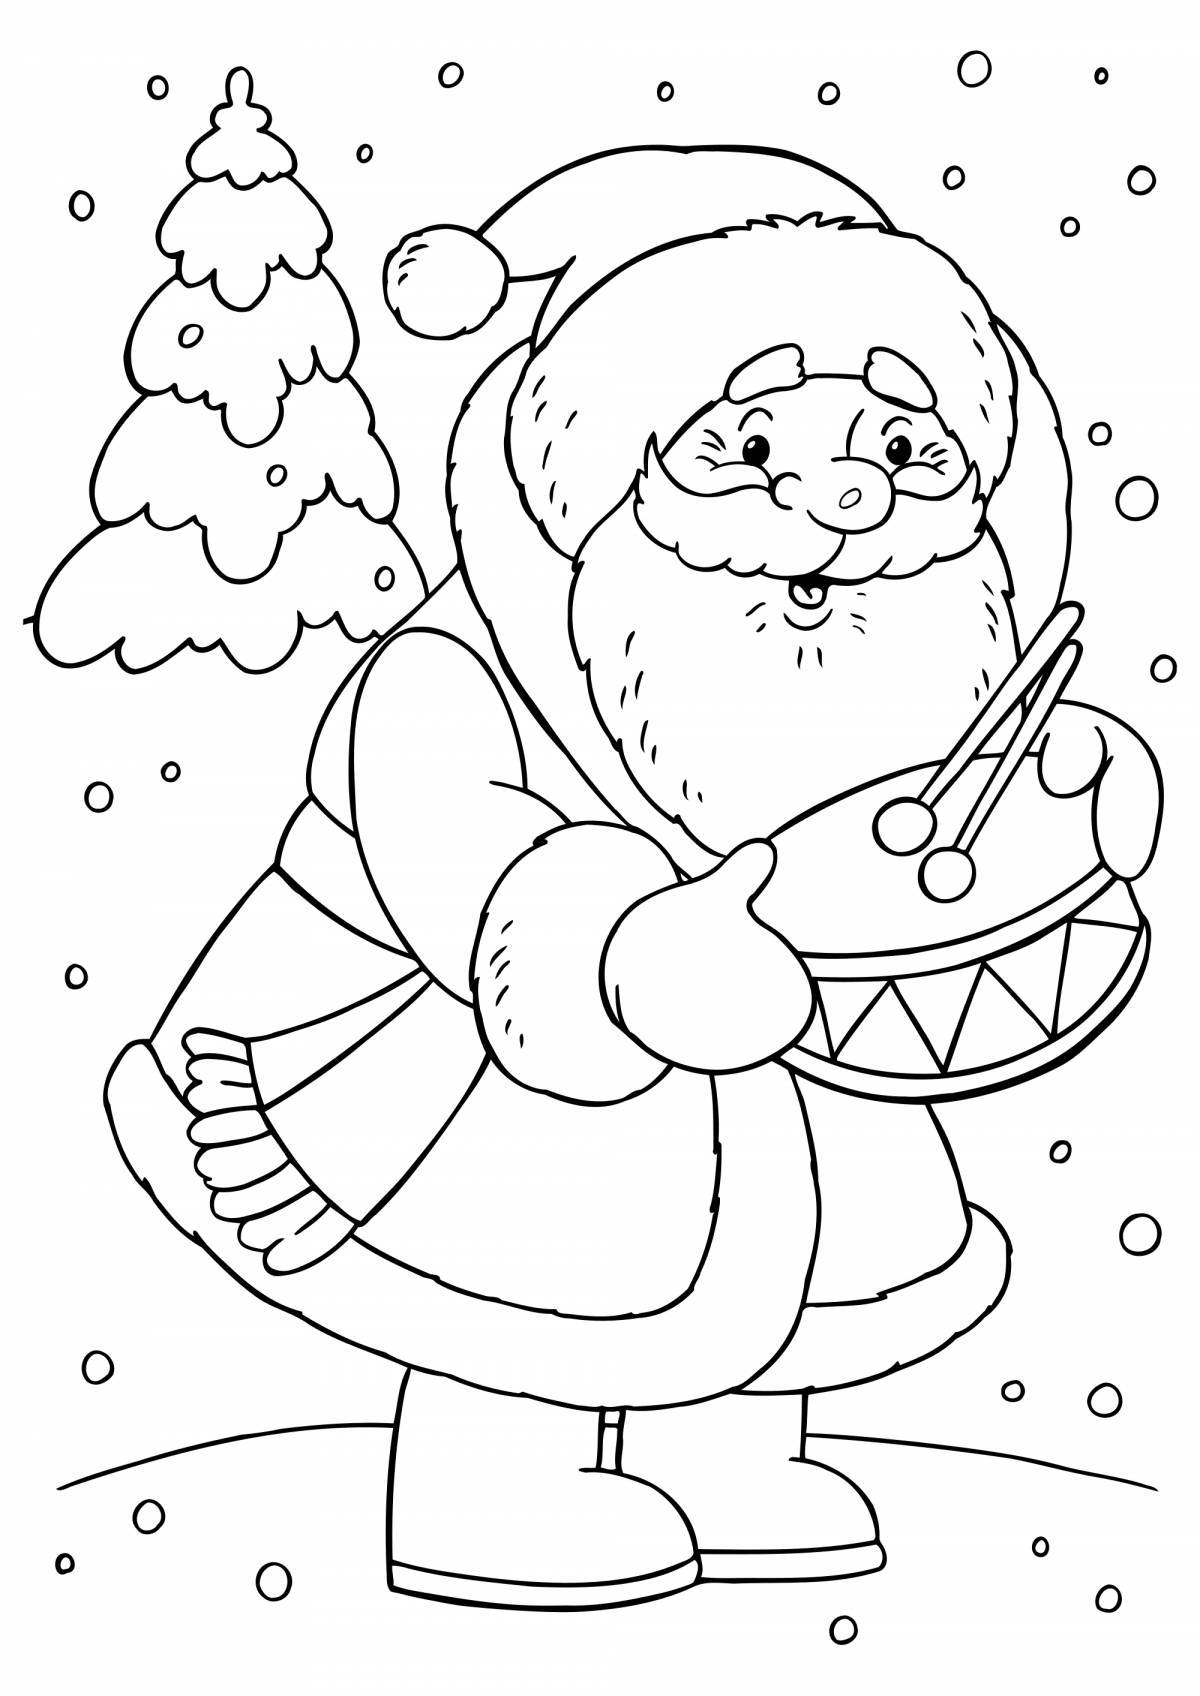 Gorgeous Christmas coloring pictures for kids